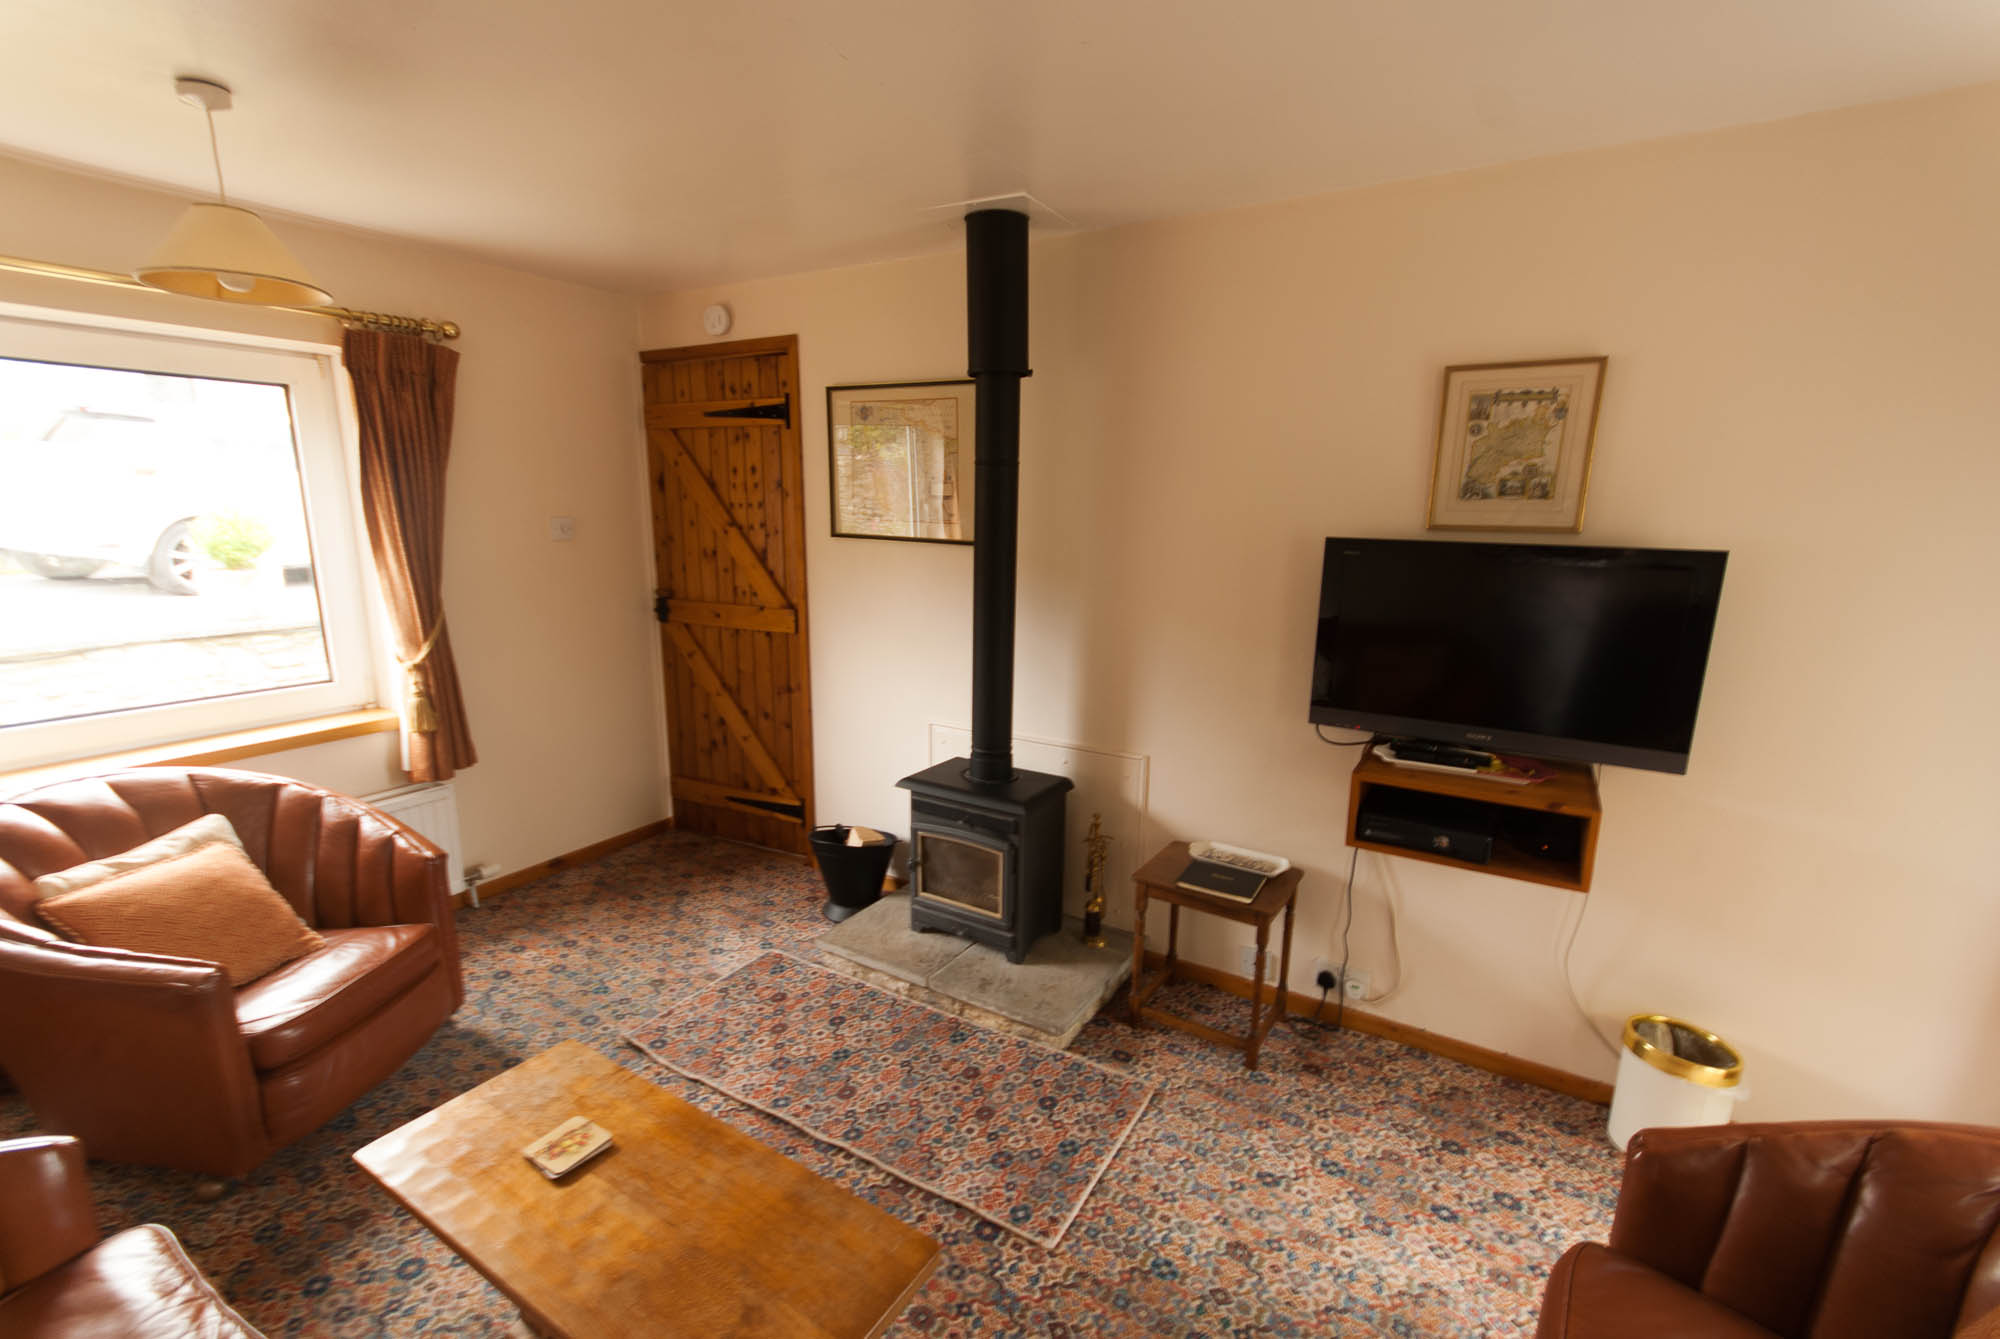 View of the lounge showing the wood burning stove and television.